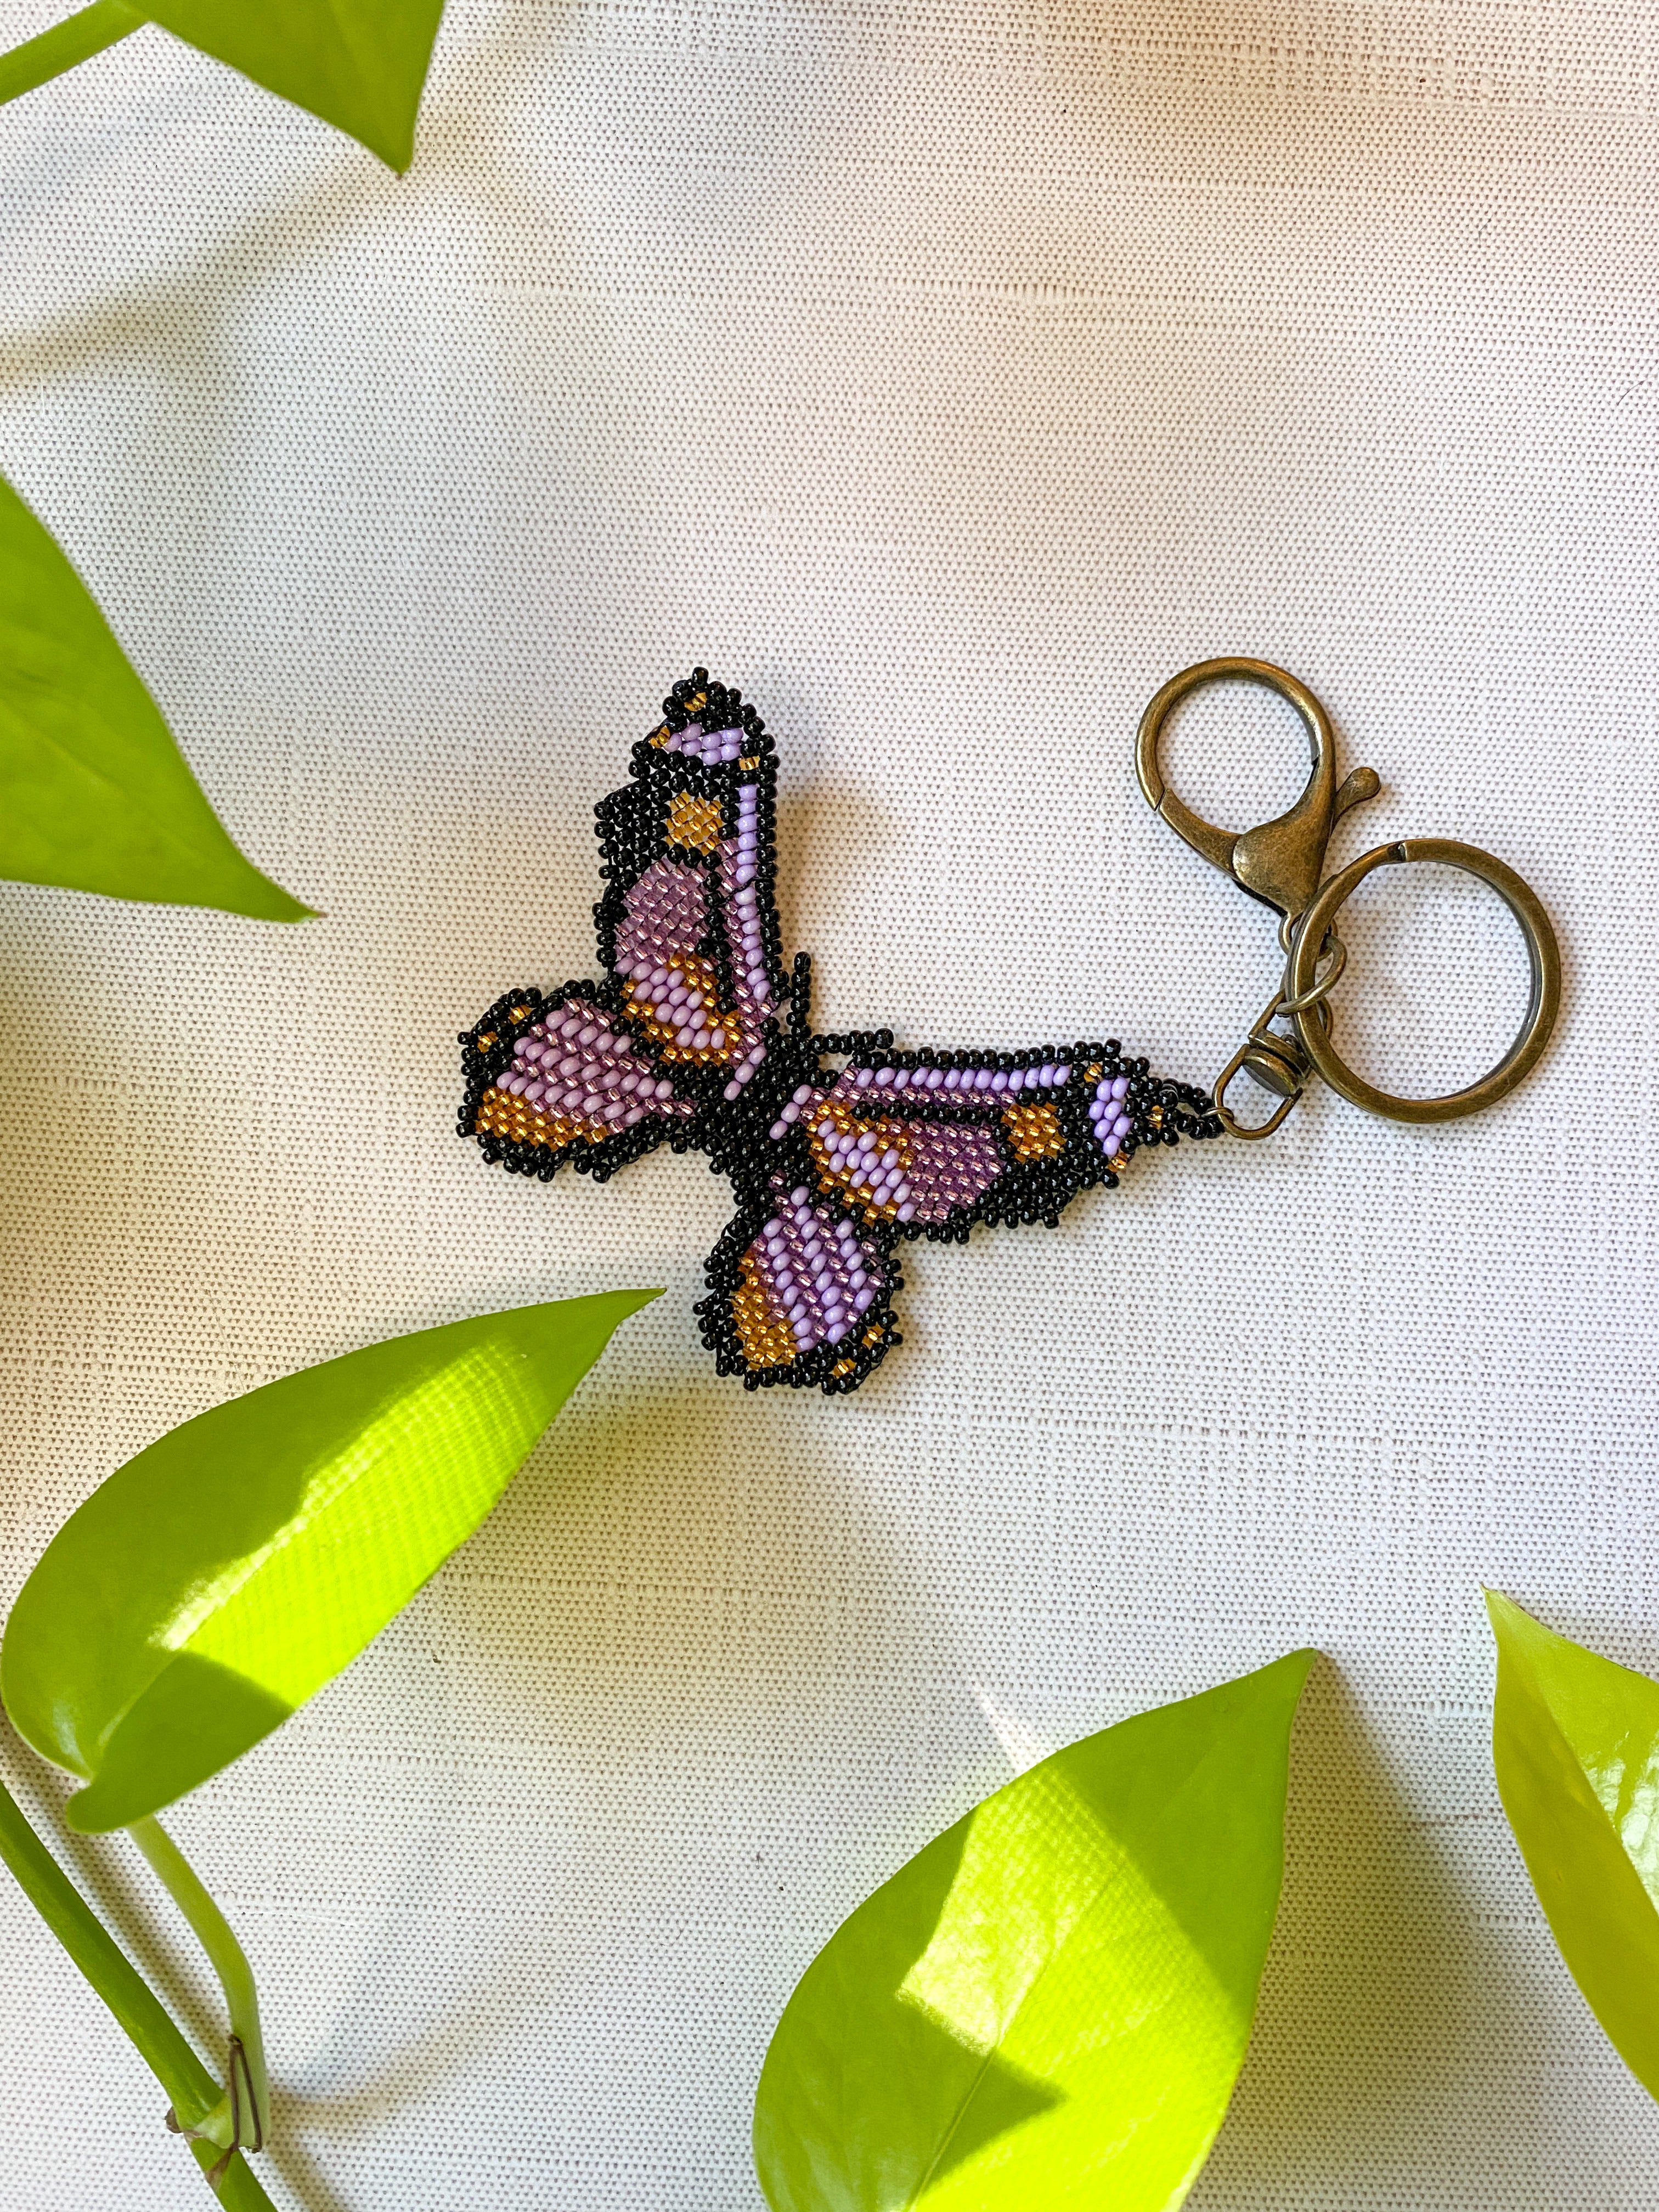 Butterfly Keychains